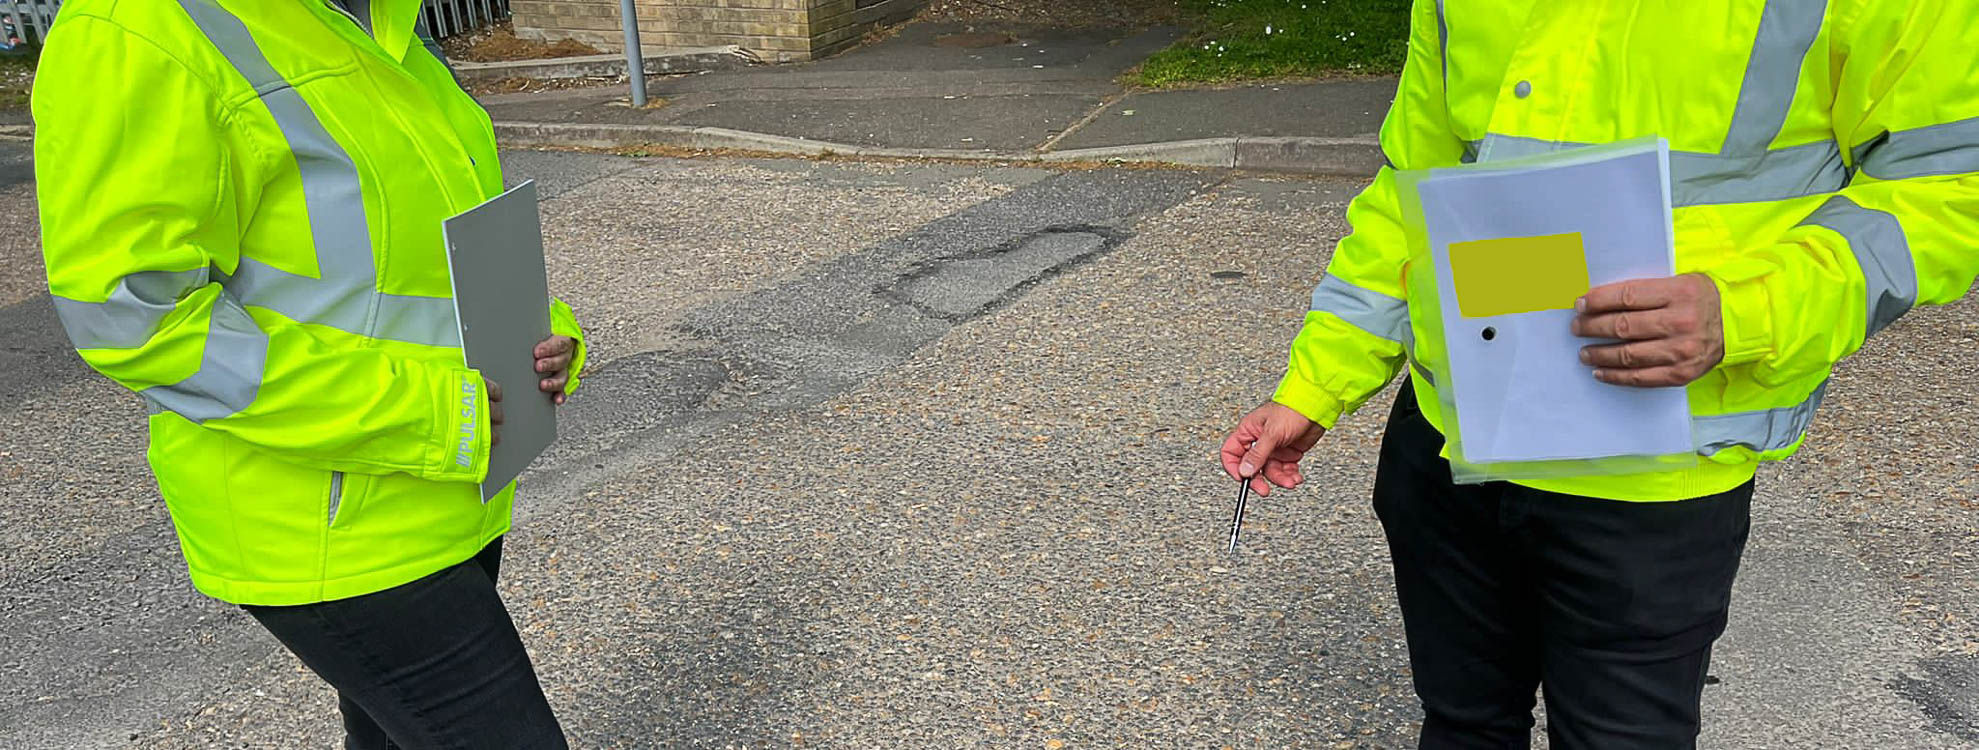 Two TMS road safety Inspectors inspecting a large pothole in the road.